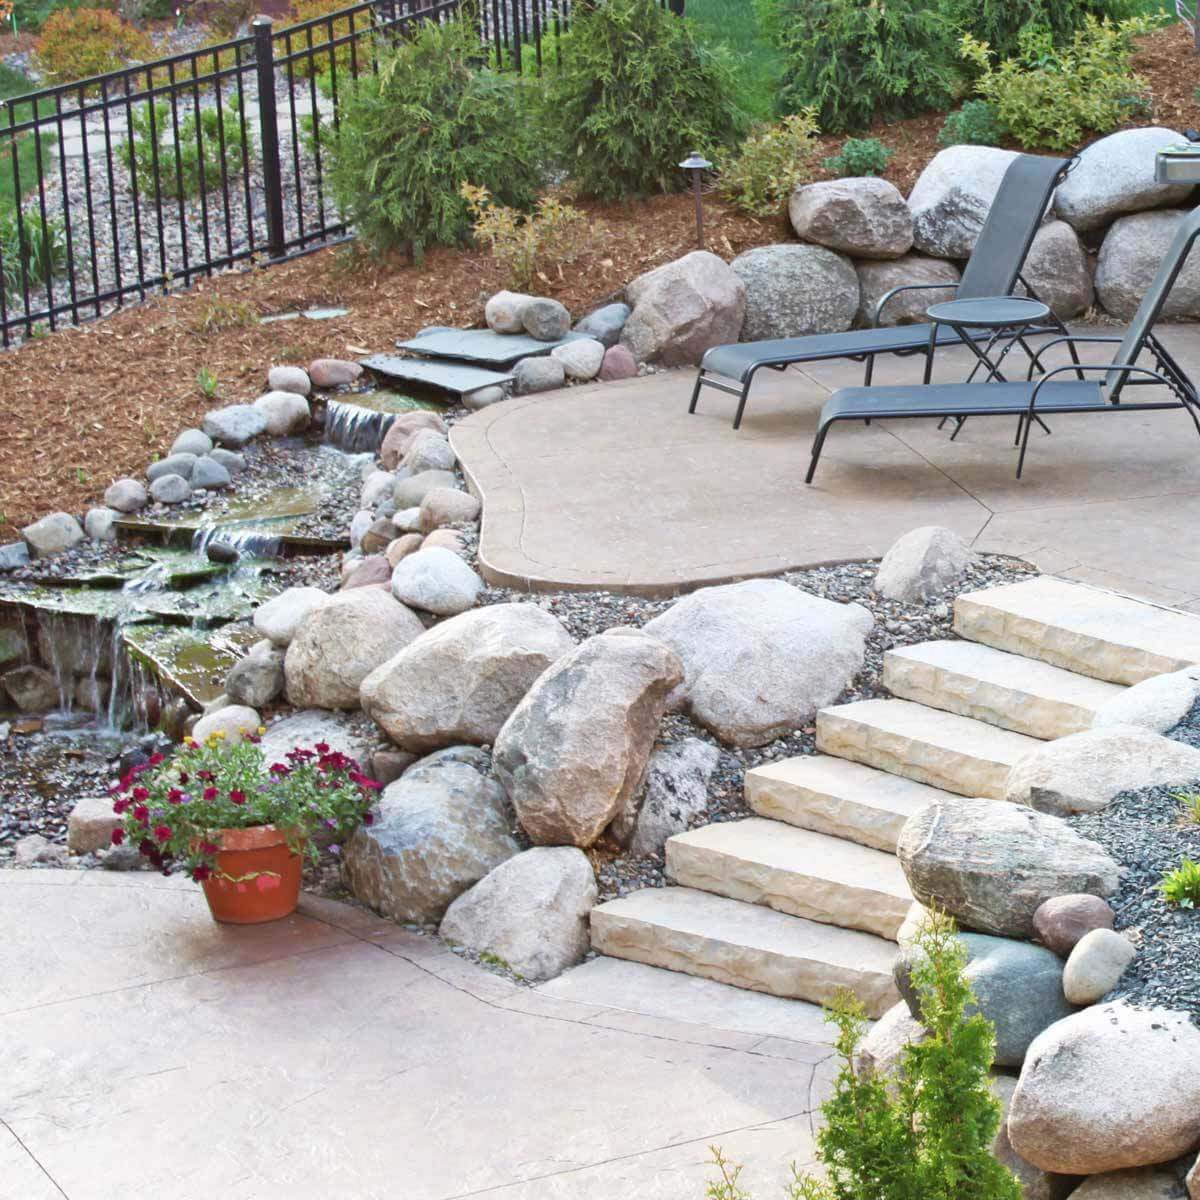 50 Breathtaking Patio Designs to Get You Thinking About Summer - Family Handyman